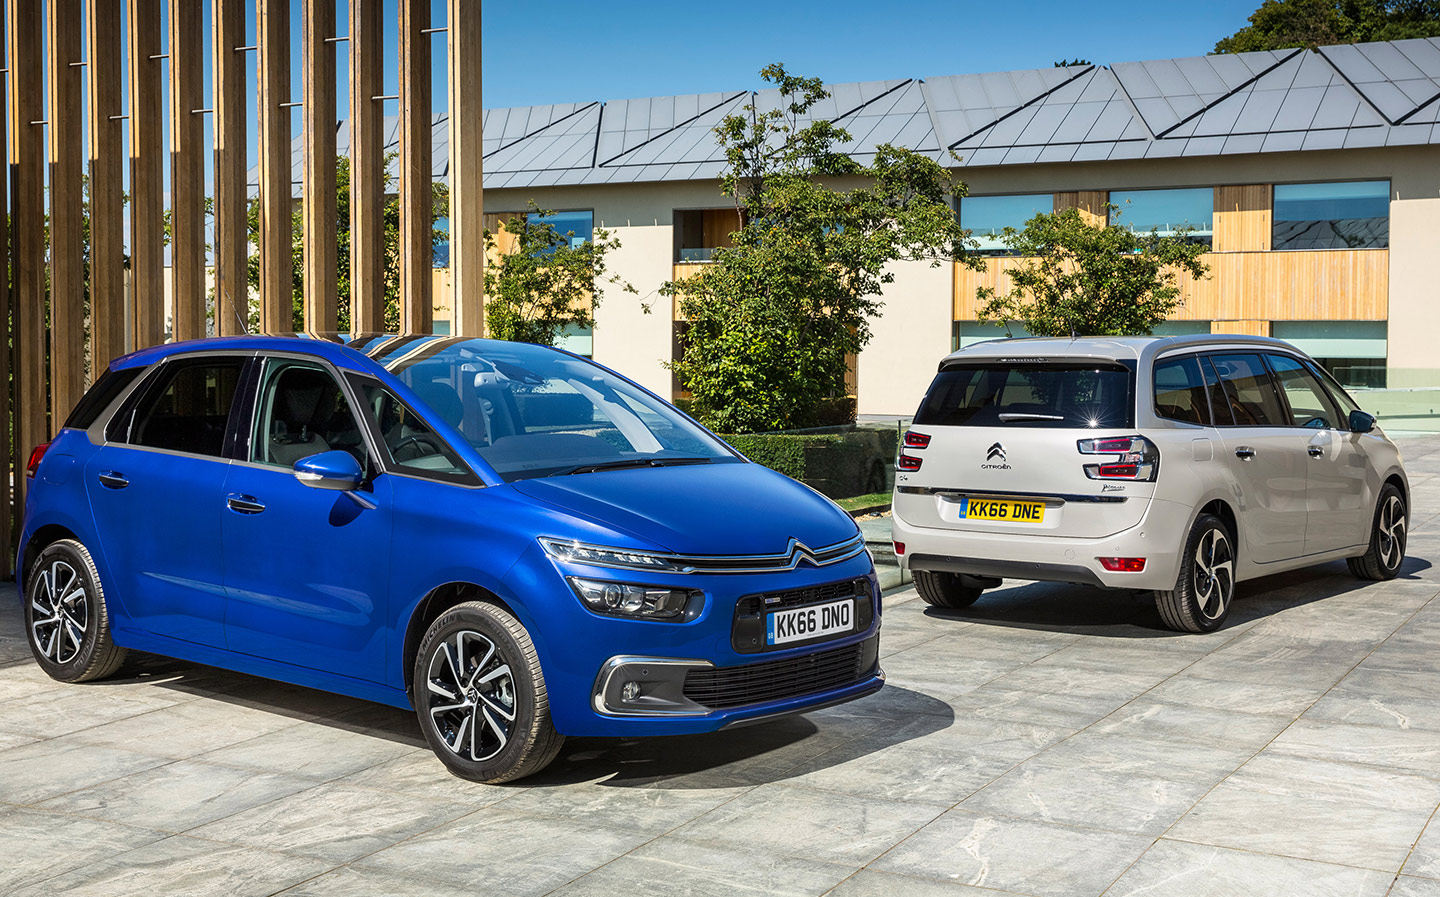 2022 Citroen C4 SUV in-depth review – comfy or overhyped?